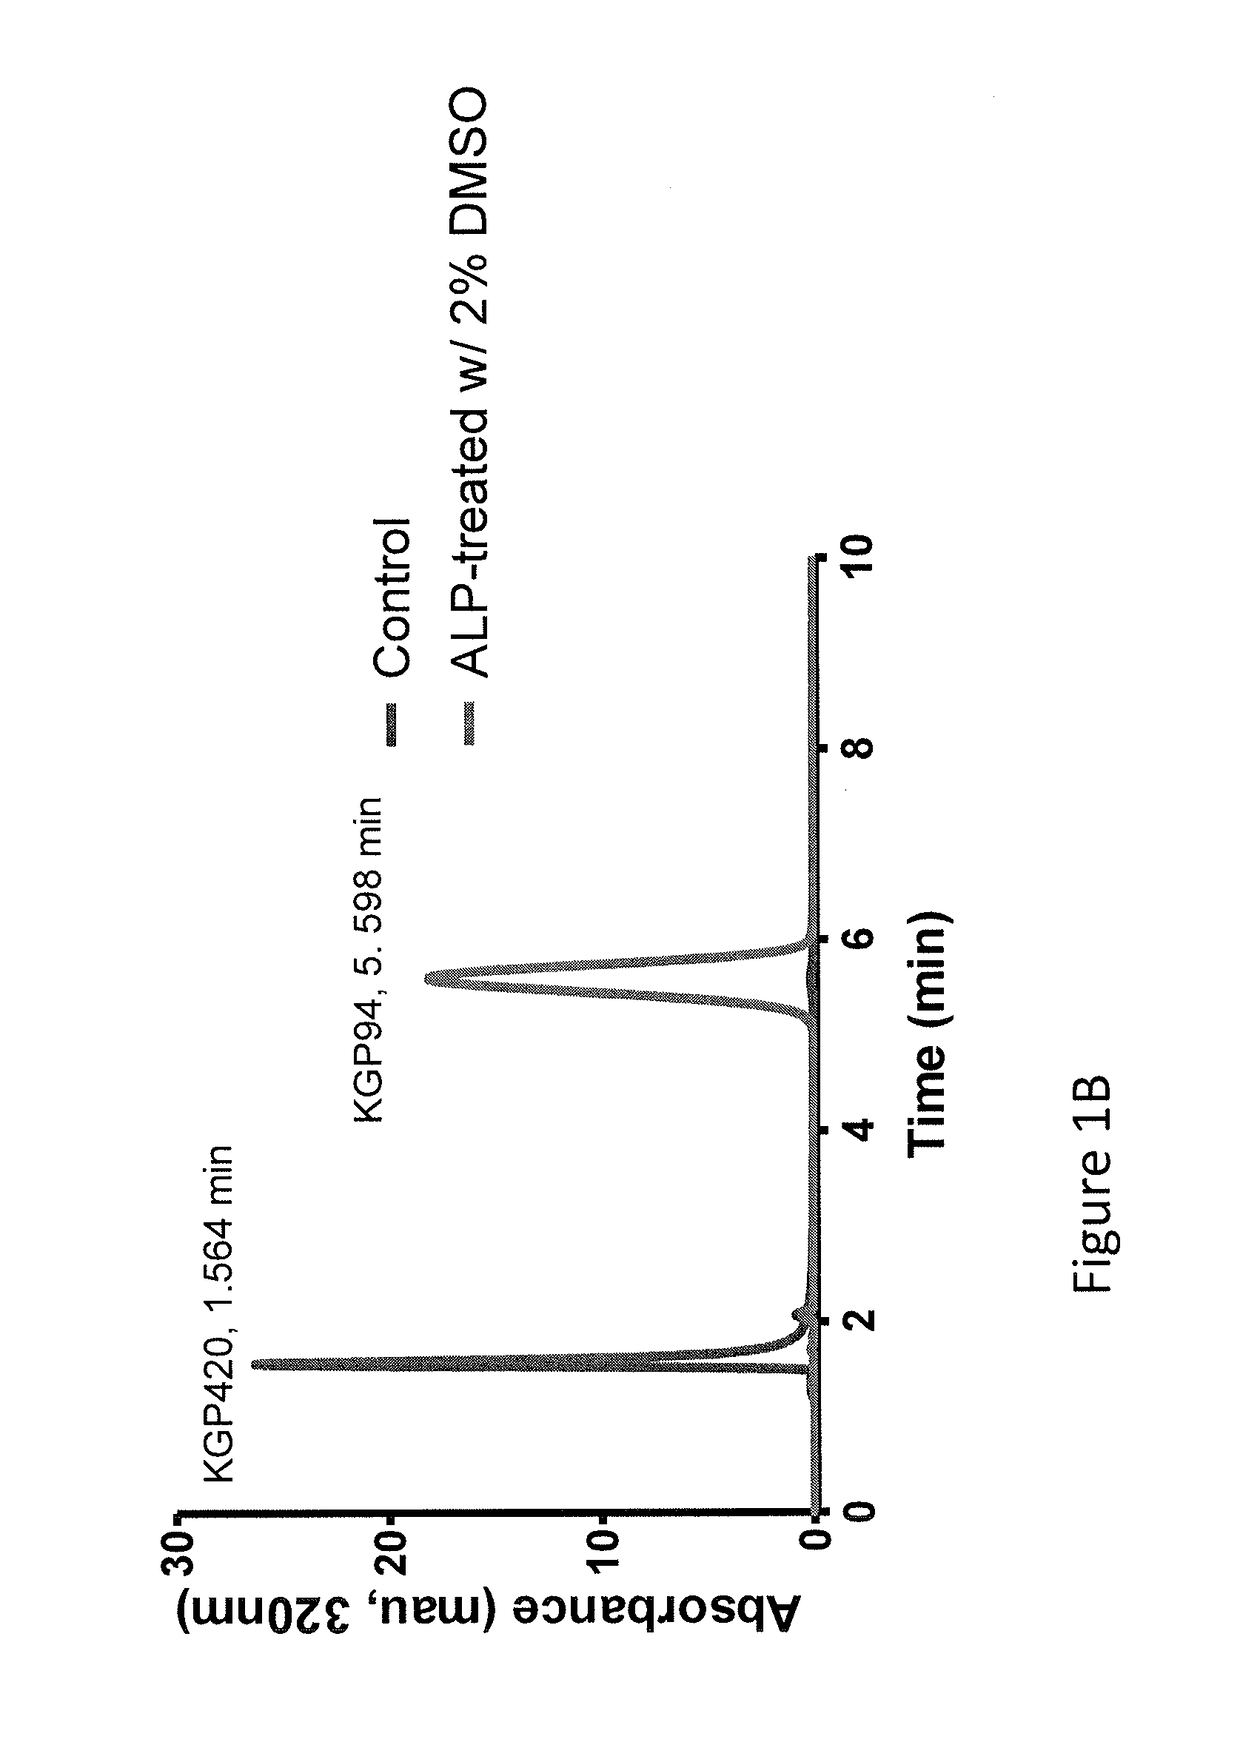 Compositions and methods for inhibition of cathepsins